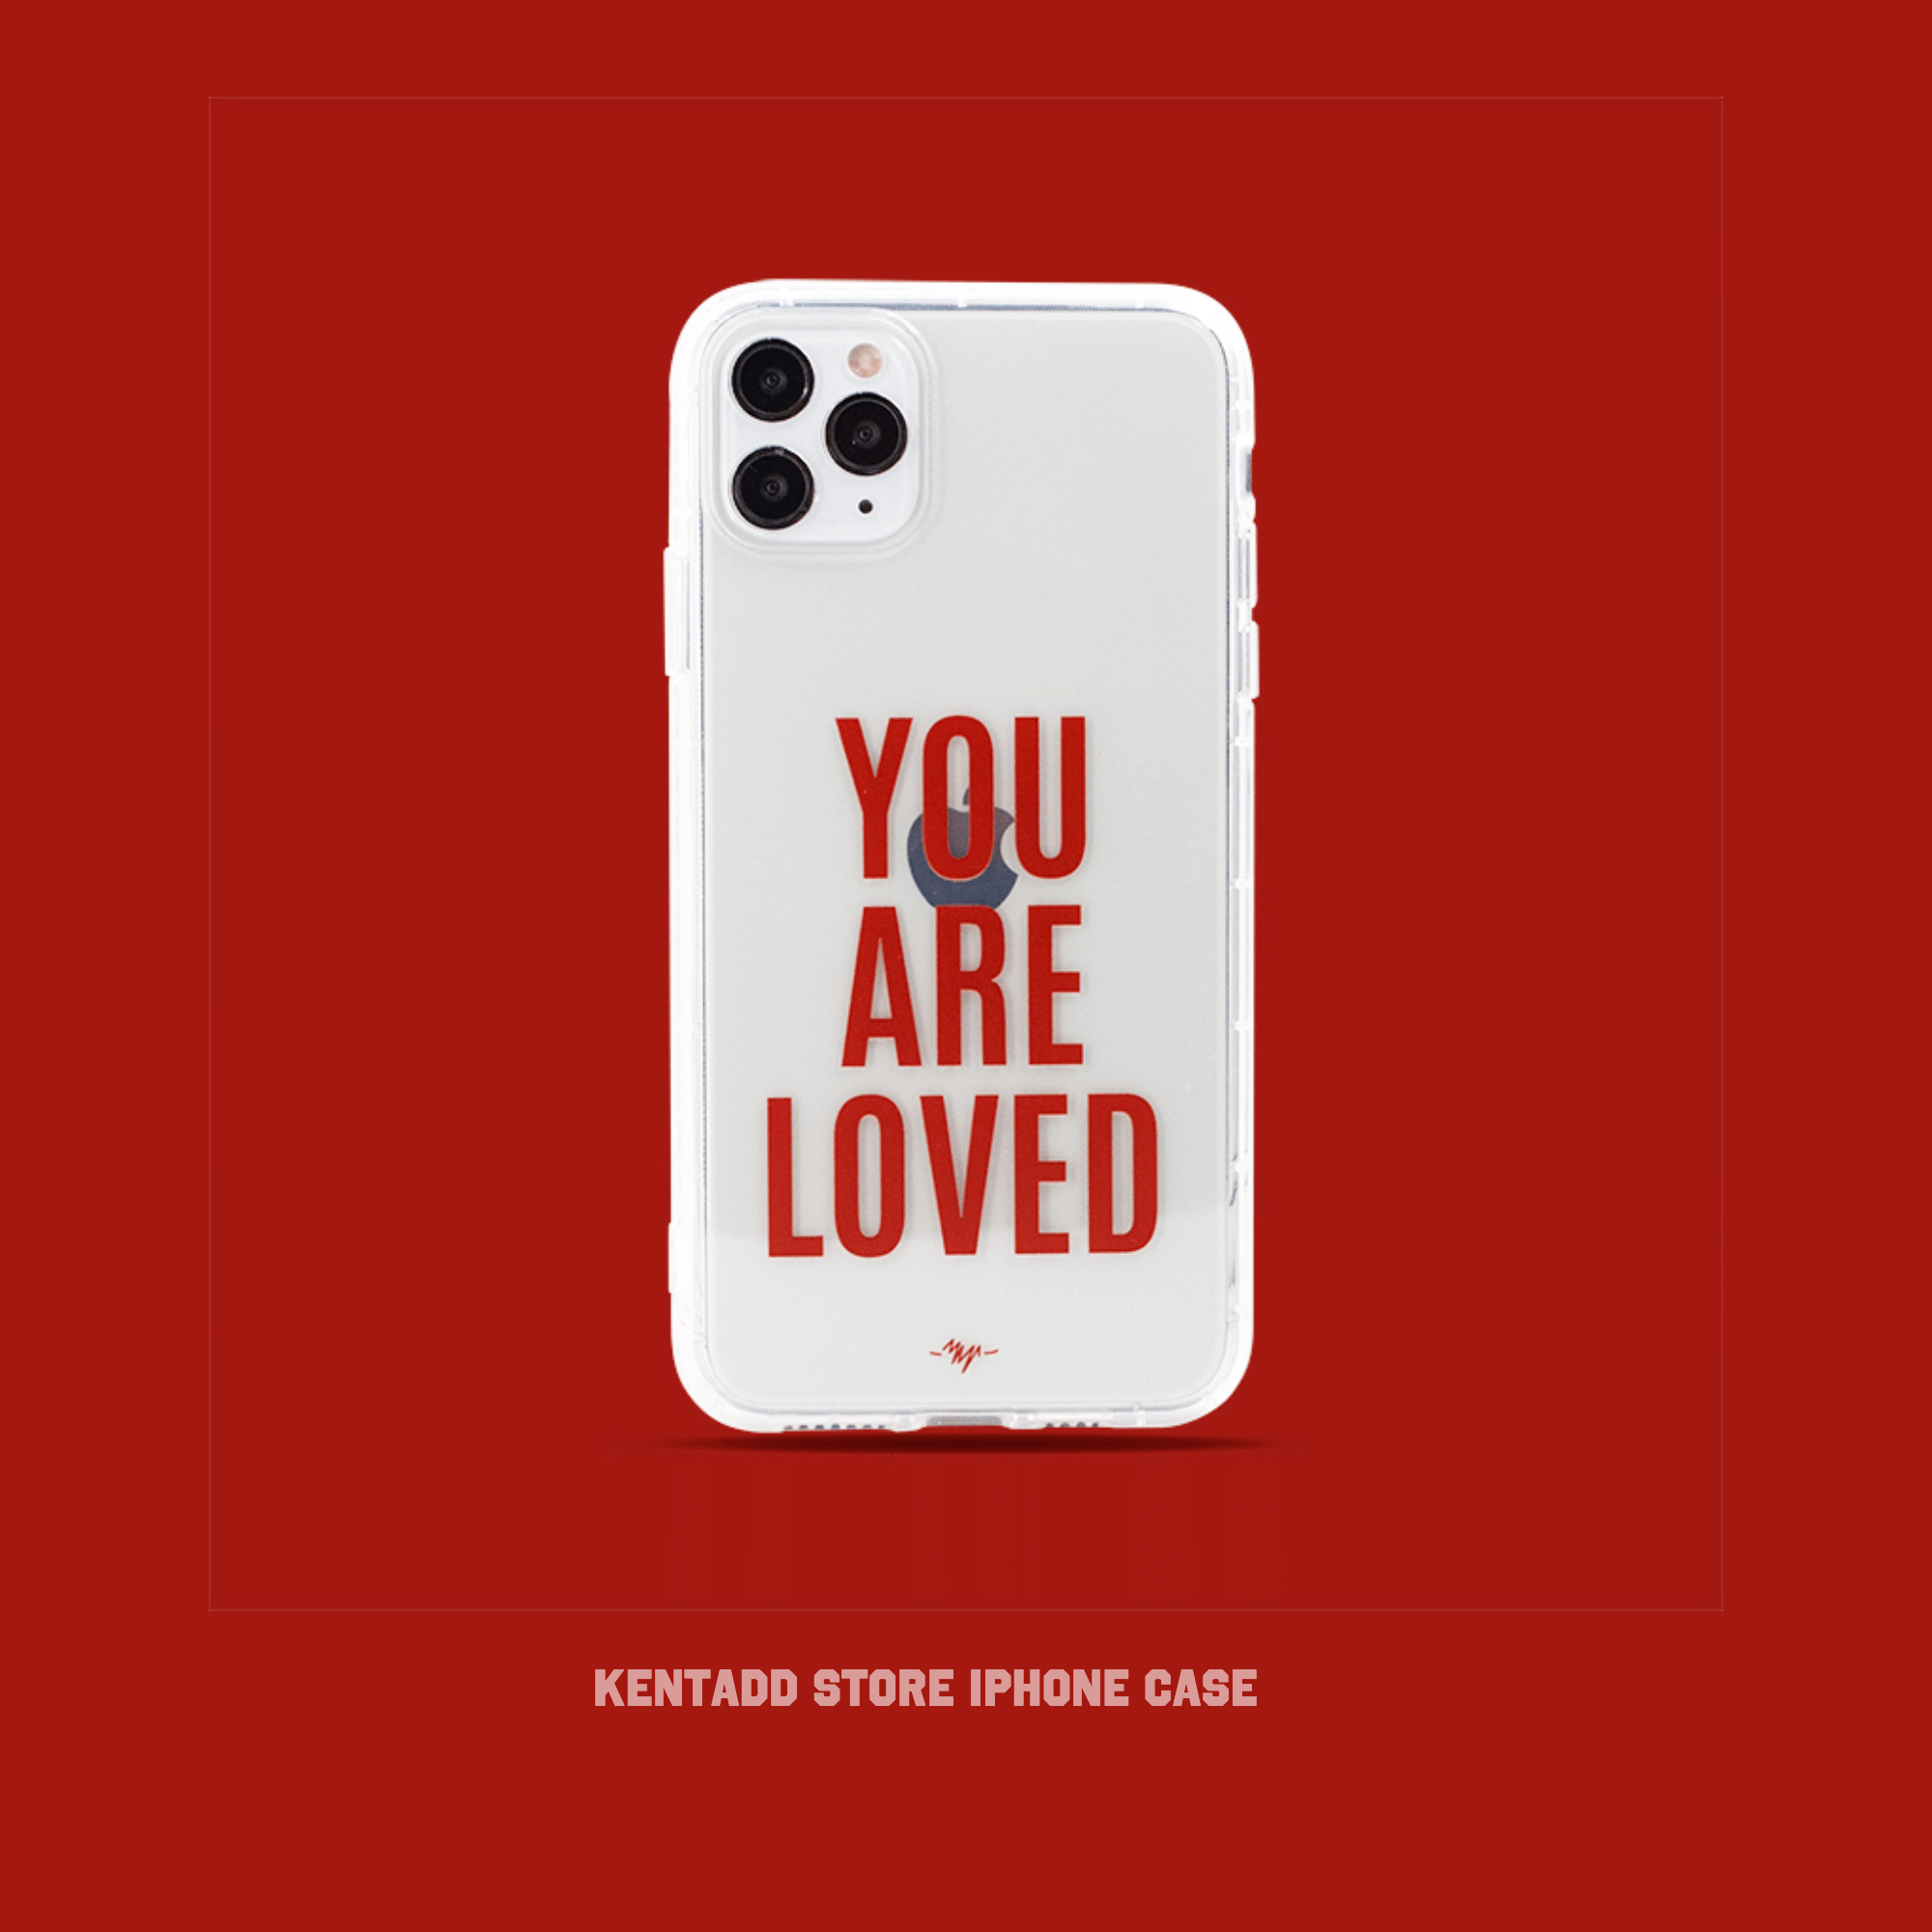 Aesthetic Phone Cases For Red Iphone 11 - Men Periodis